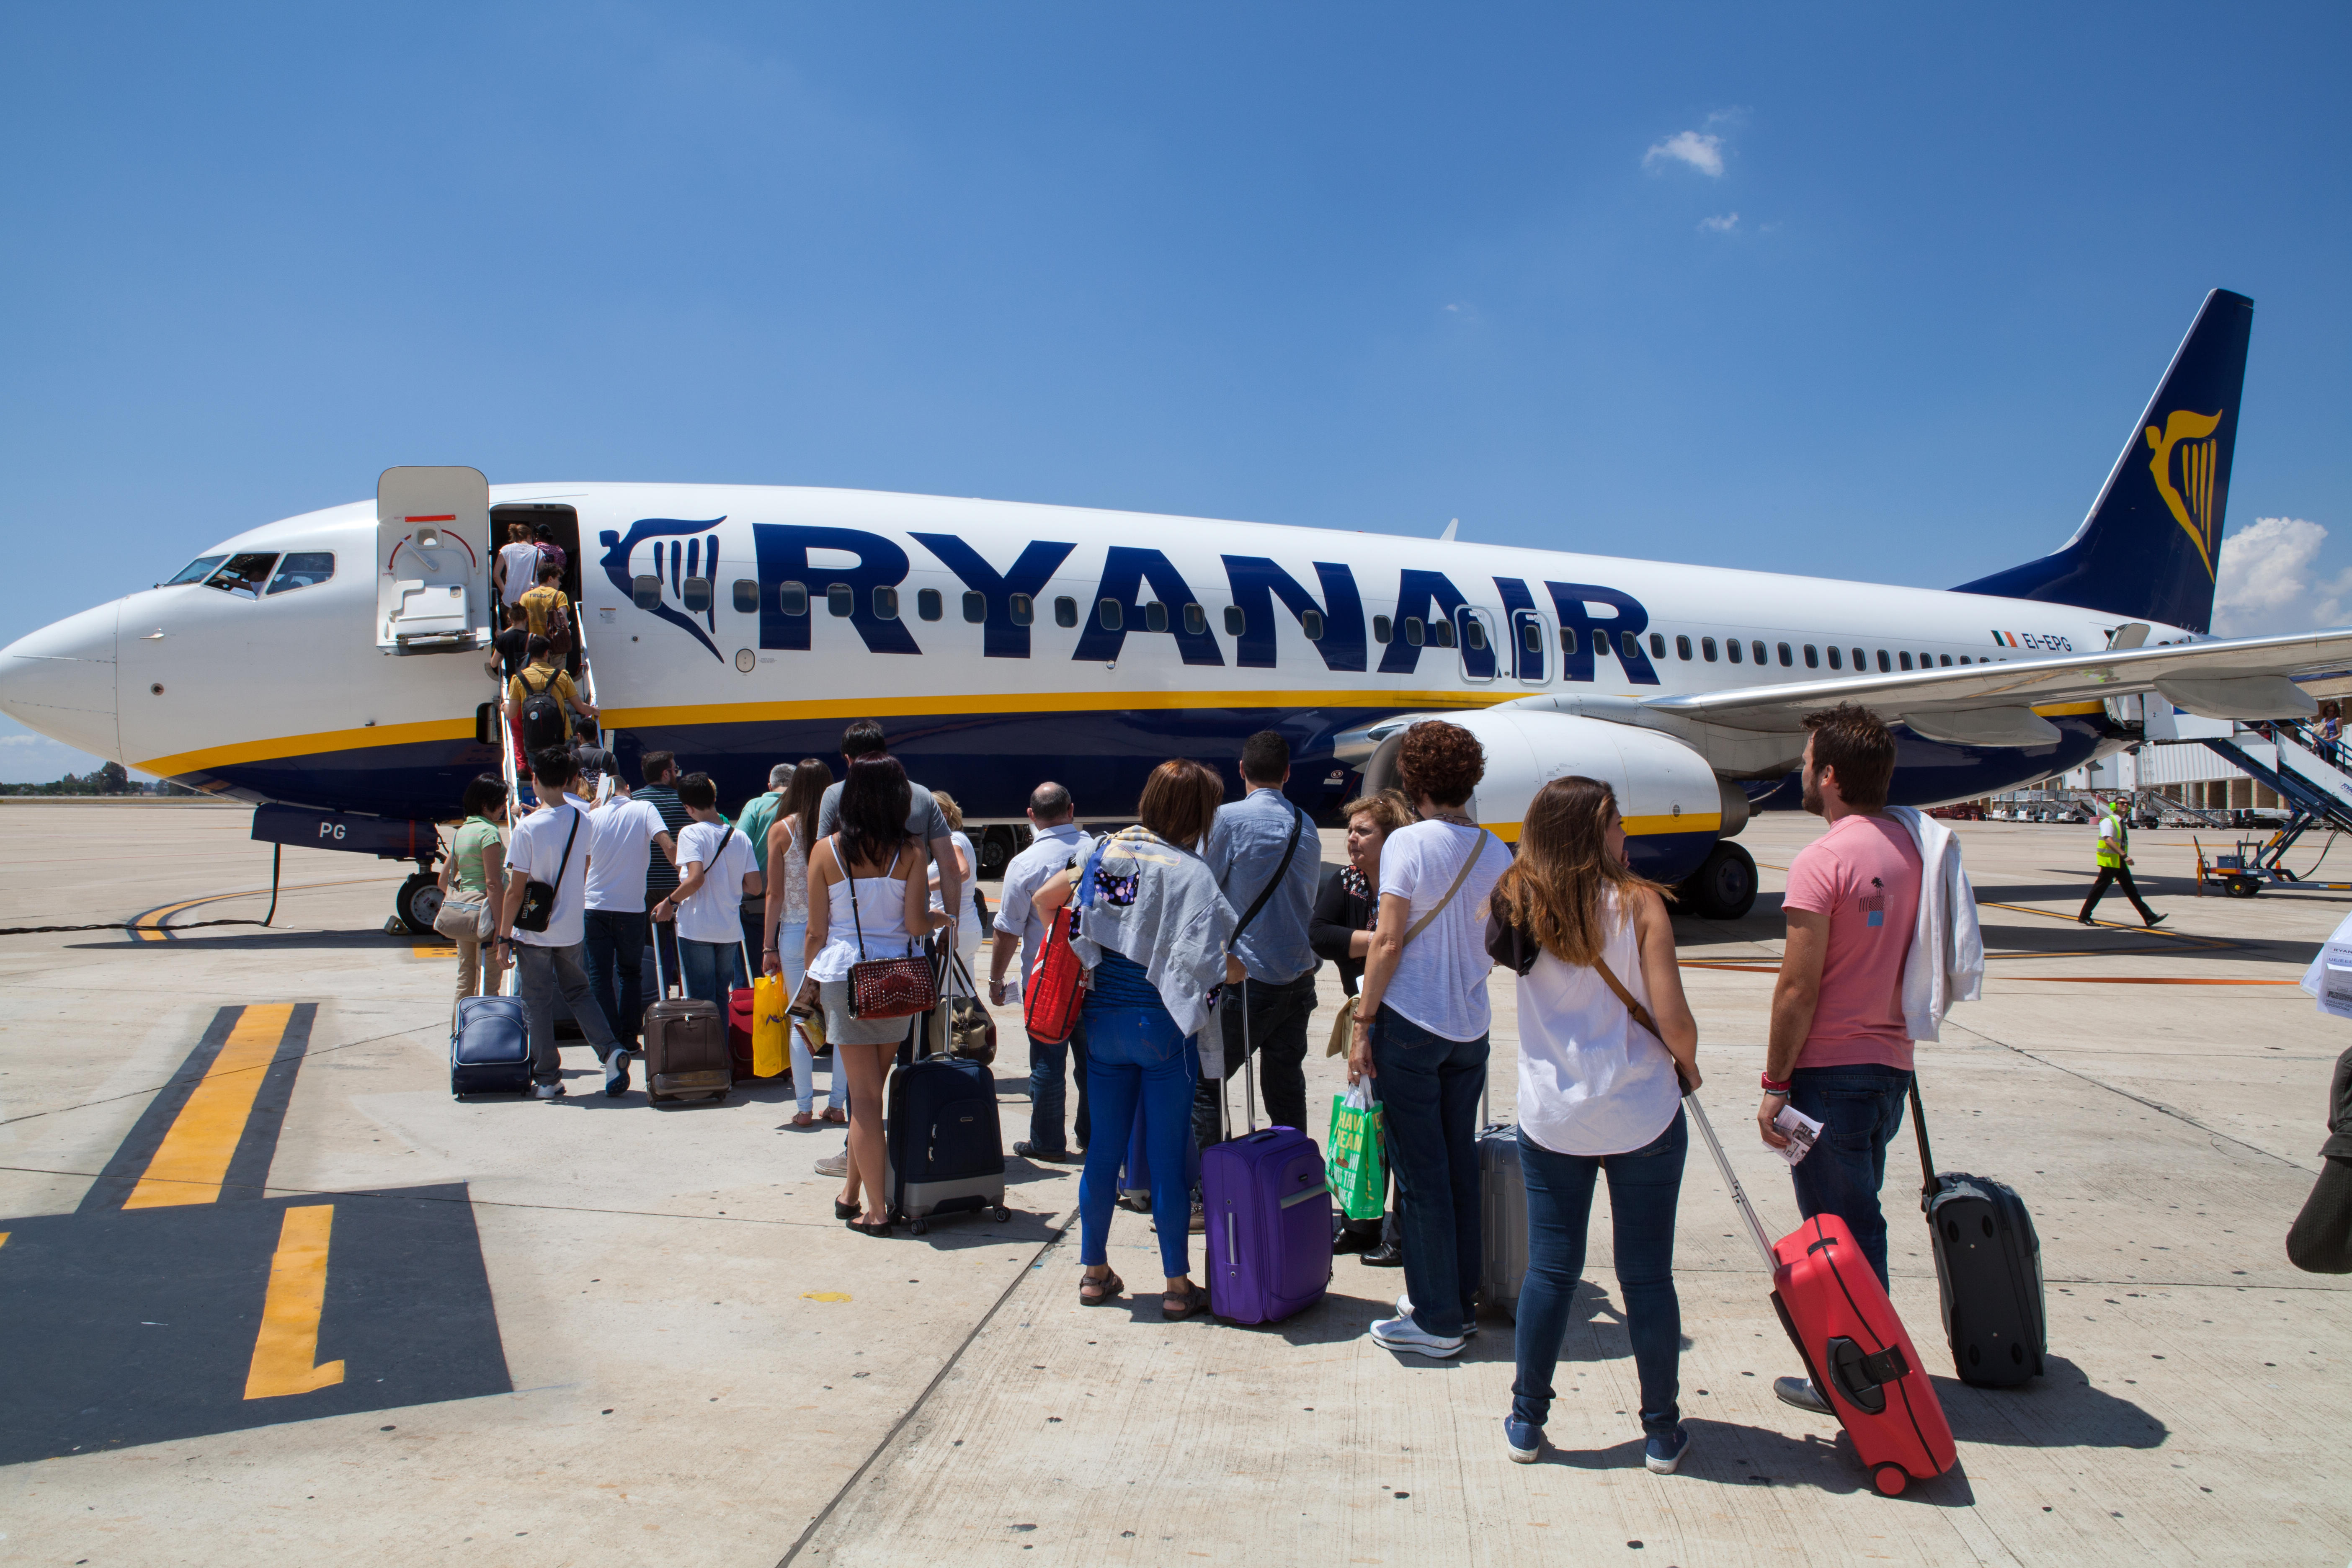 Fare with Ryanair and Wizz Air were often the most expensive